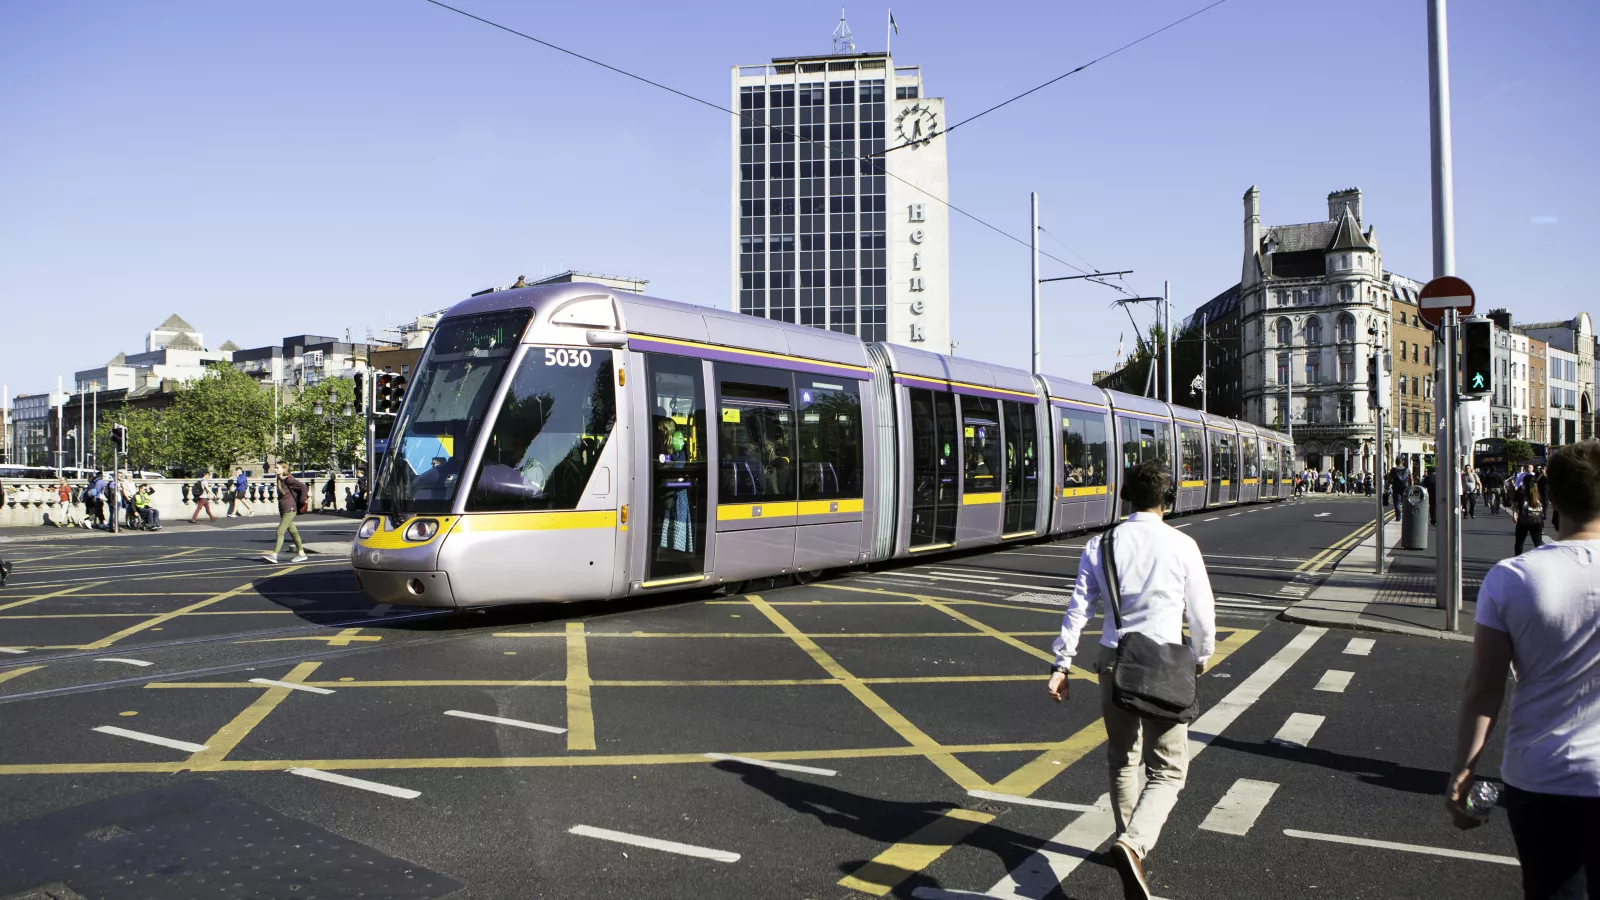 Image of Luas at O'Connell Bridge